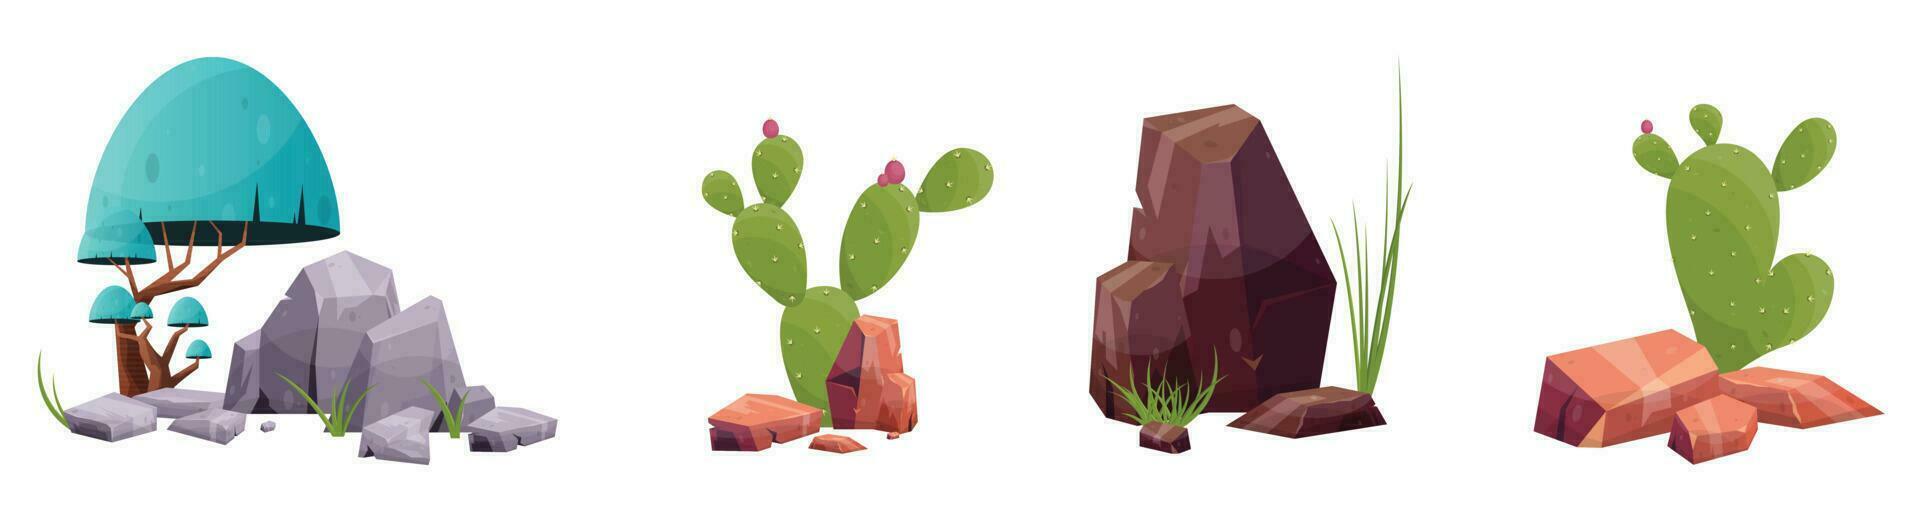 Desert rock with plants in different colors vector illustration isolated on white